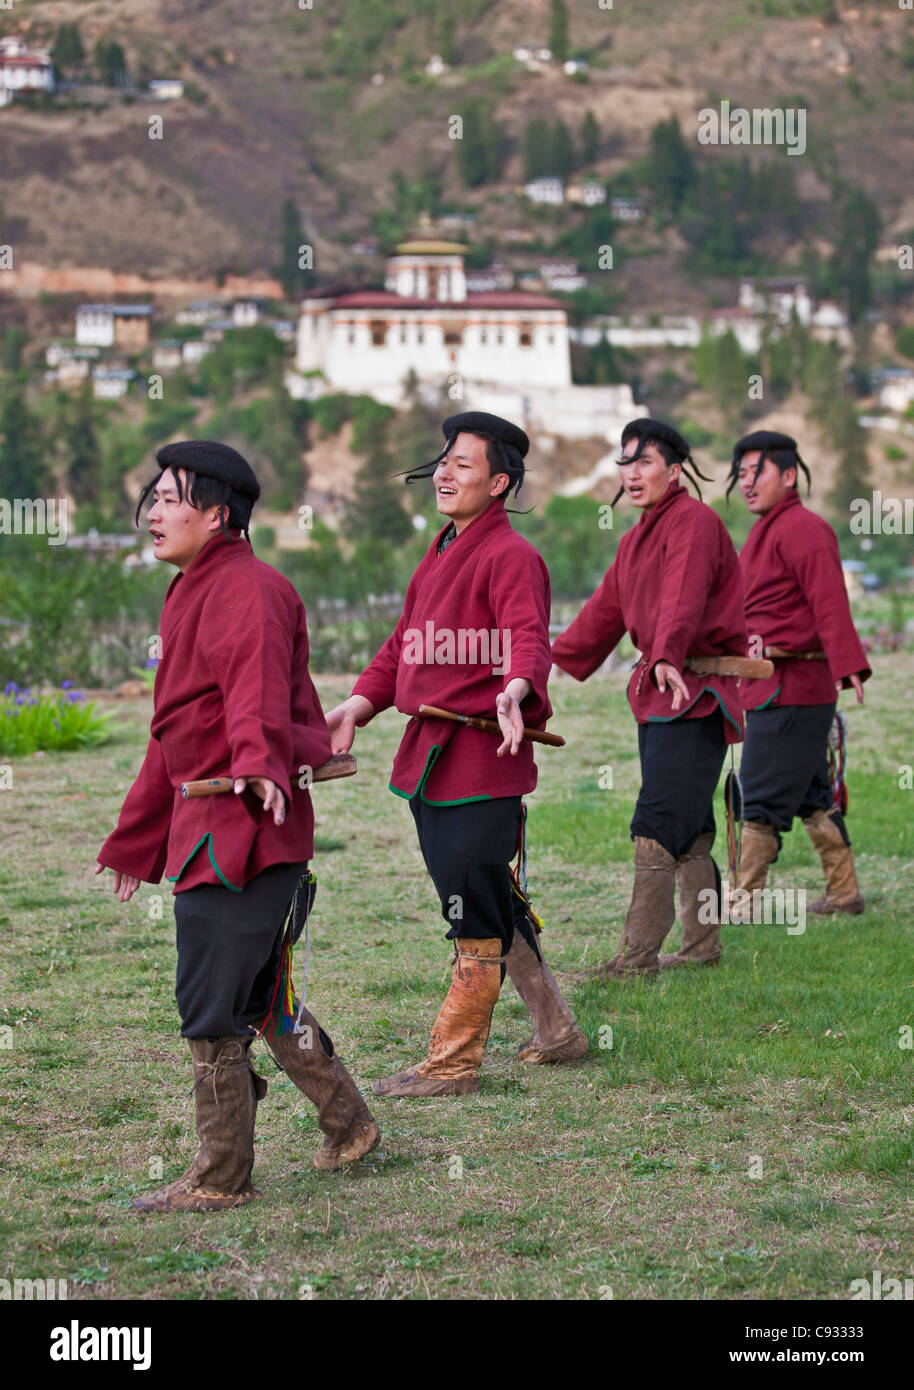 Dancers perform a dance of nomadic yak herders, Layap, who live at high altitude in the far west of Bhutan bordering Tibet. Stock Photo